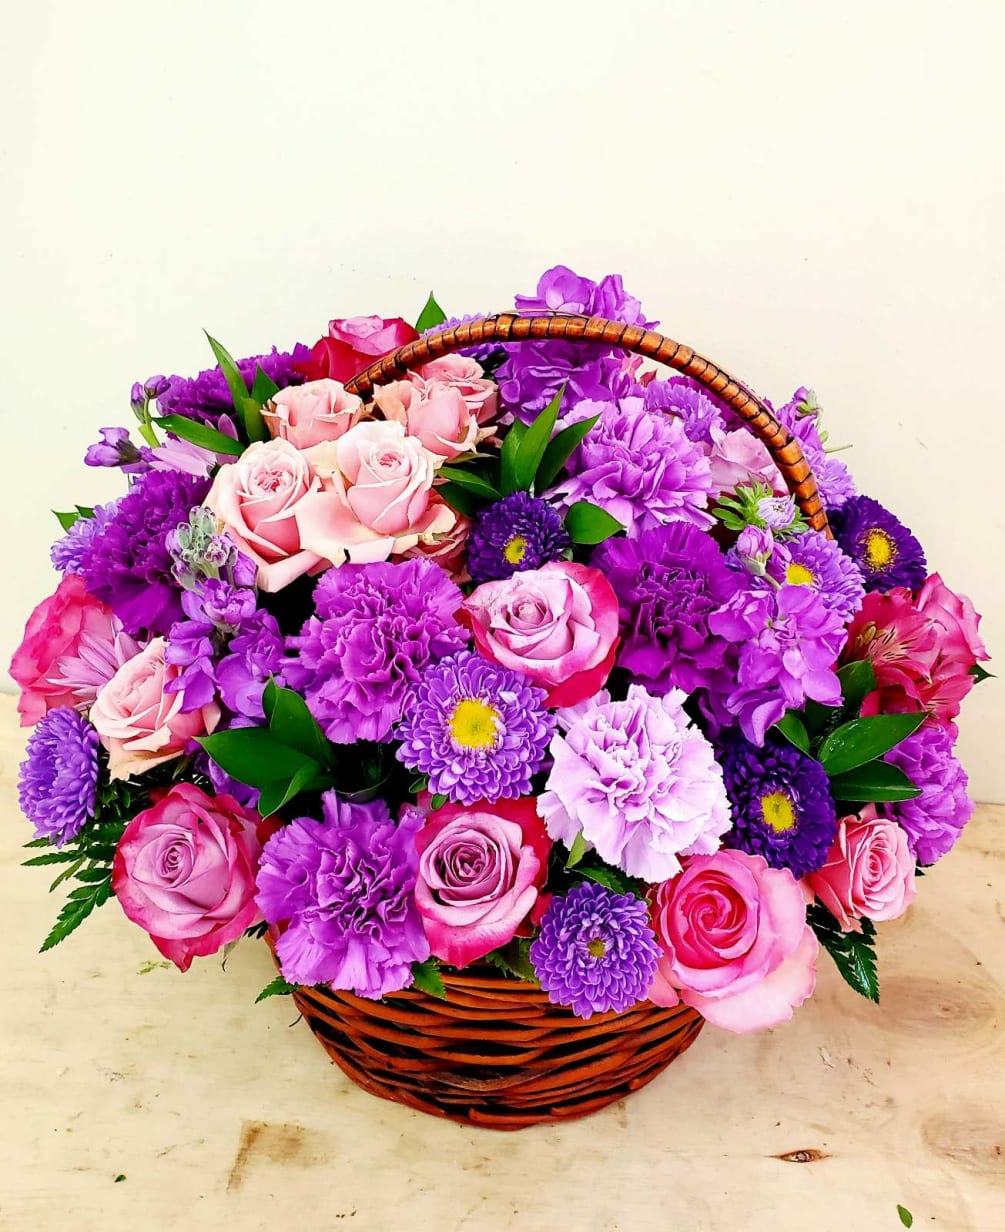 The shades of purples carefully blended makes this basket stunning. Express your